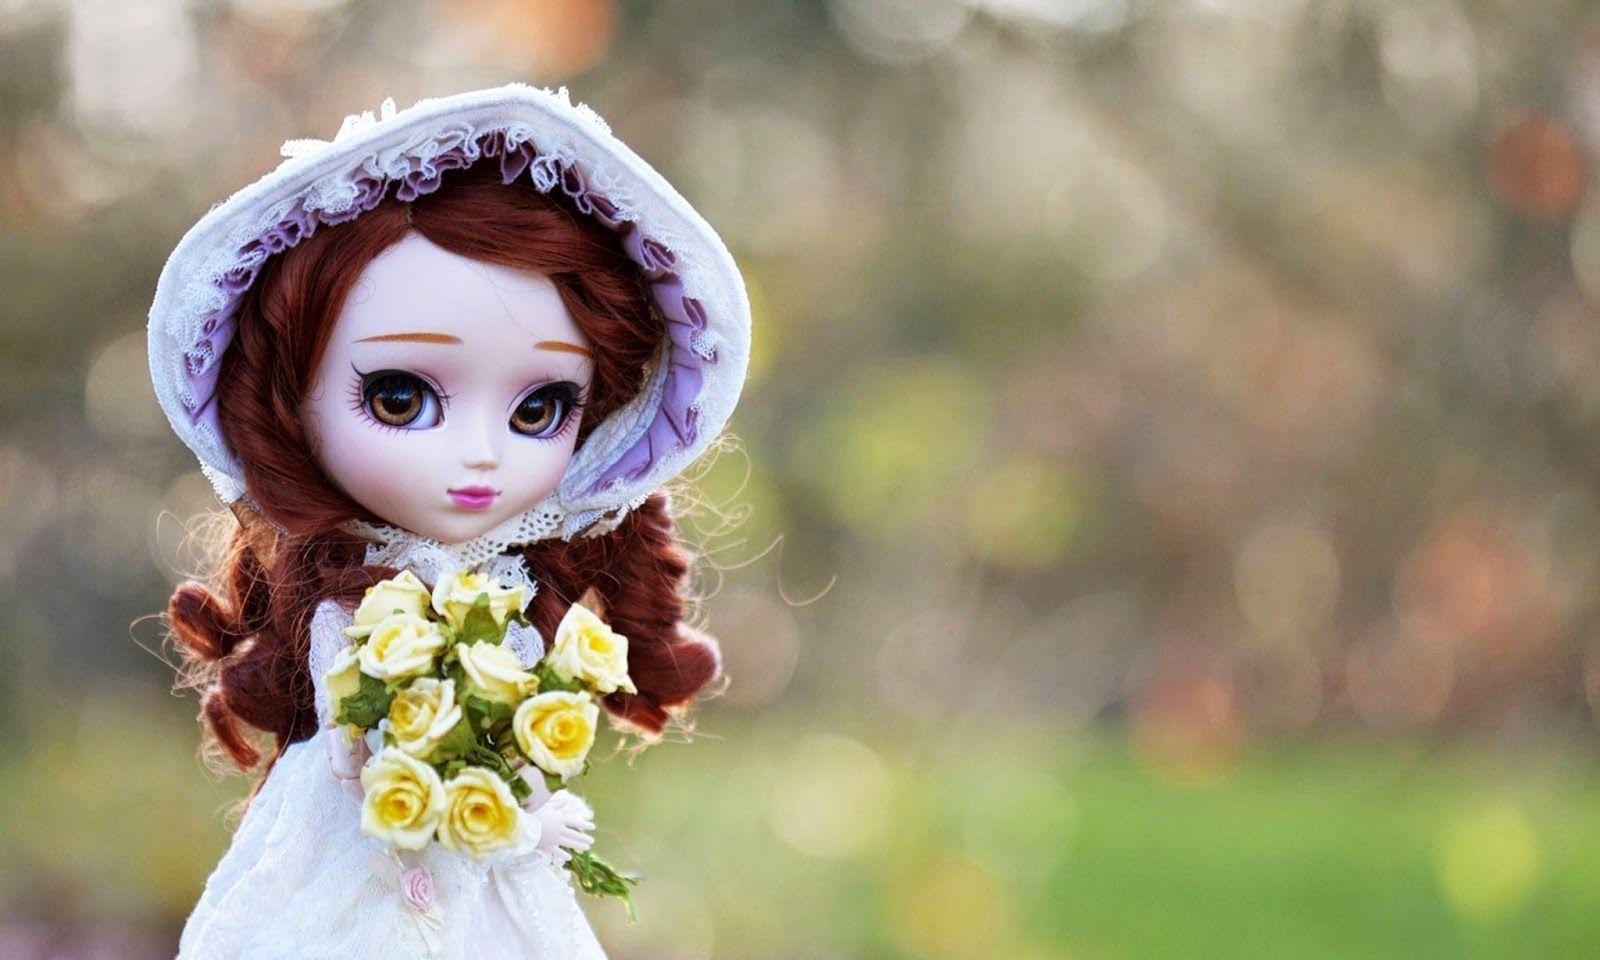 Doll Full HD Wallpapers - Wallpaper Cave